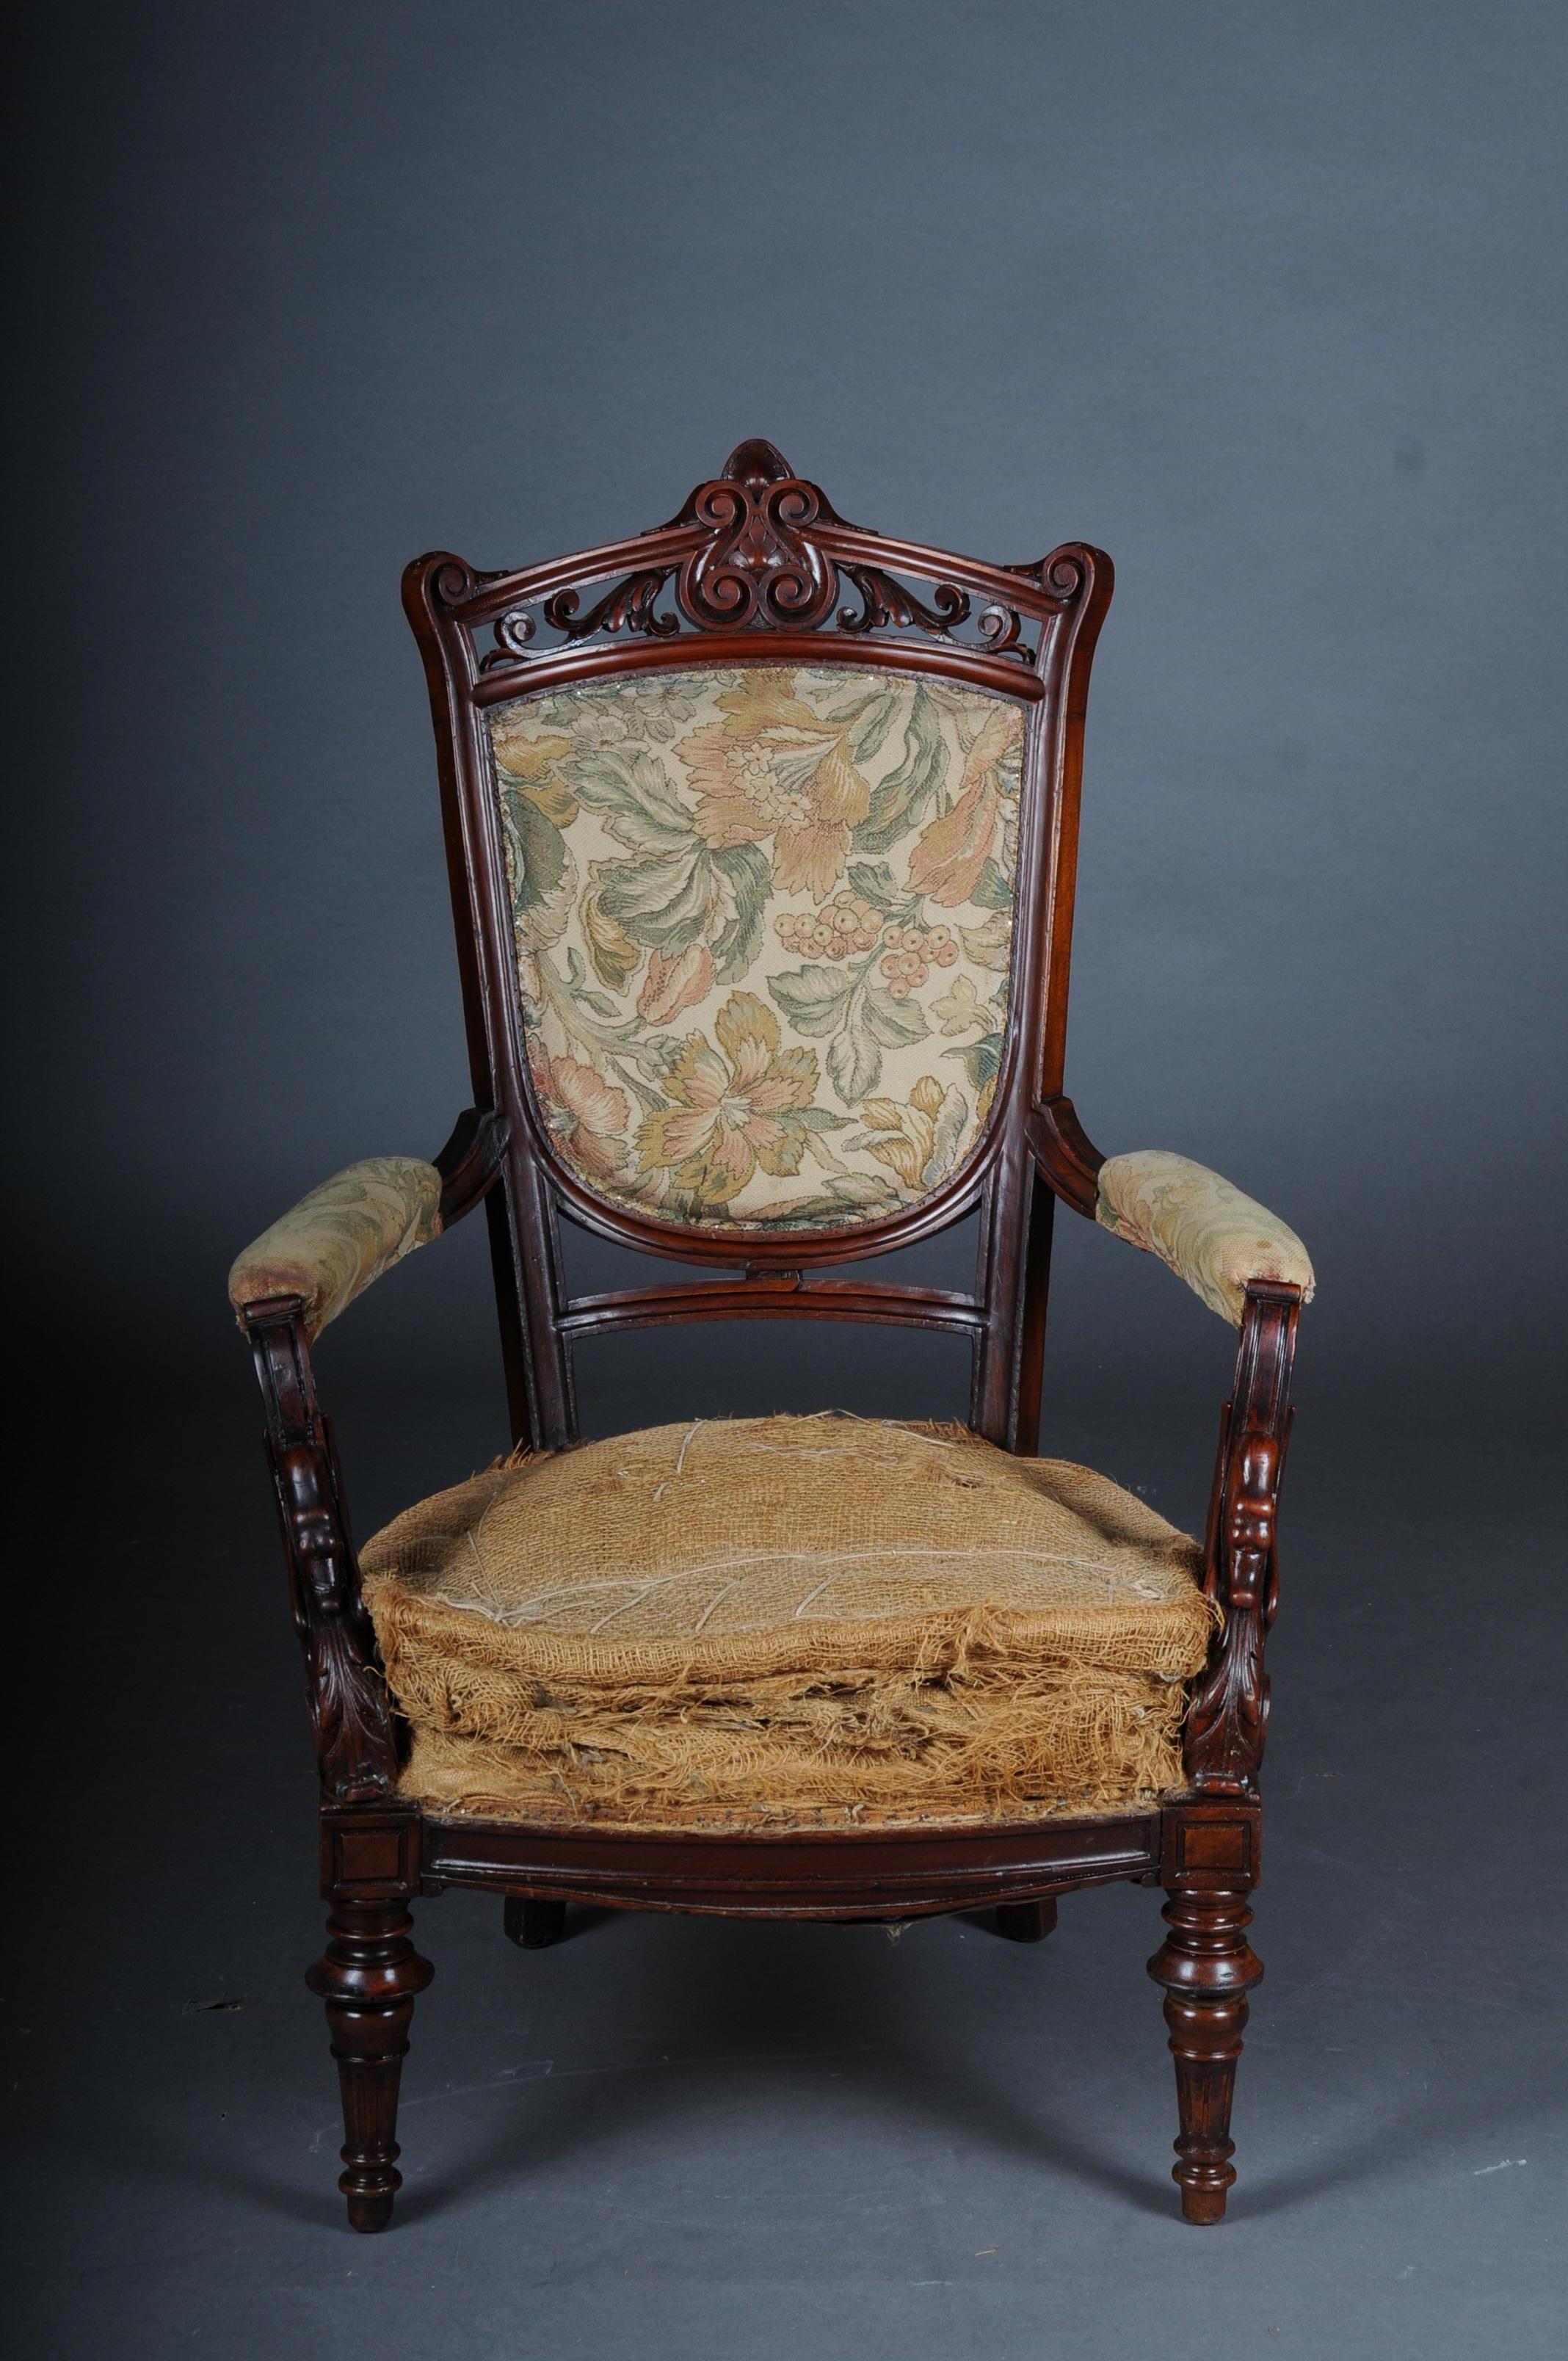 19th century Unique Empire armchair around 1820, France, Mahogany

Solid mahogany wood, France around 1820/30.
Finely carved swan's heads on each armrest. Extremely high quality and historical armchair. Classic upholstery without fabric cover.